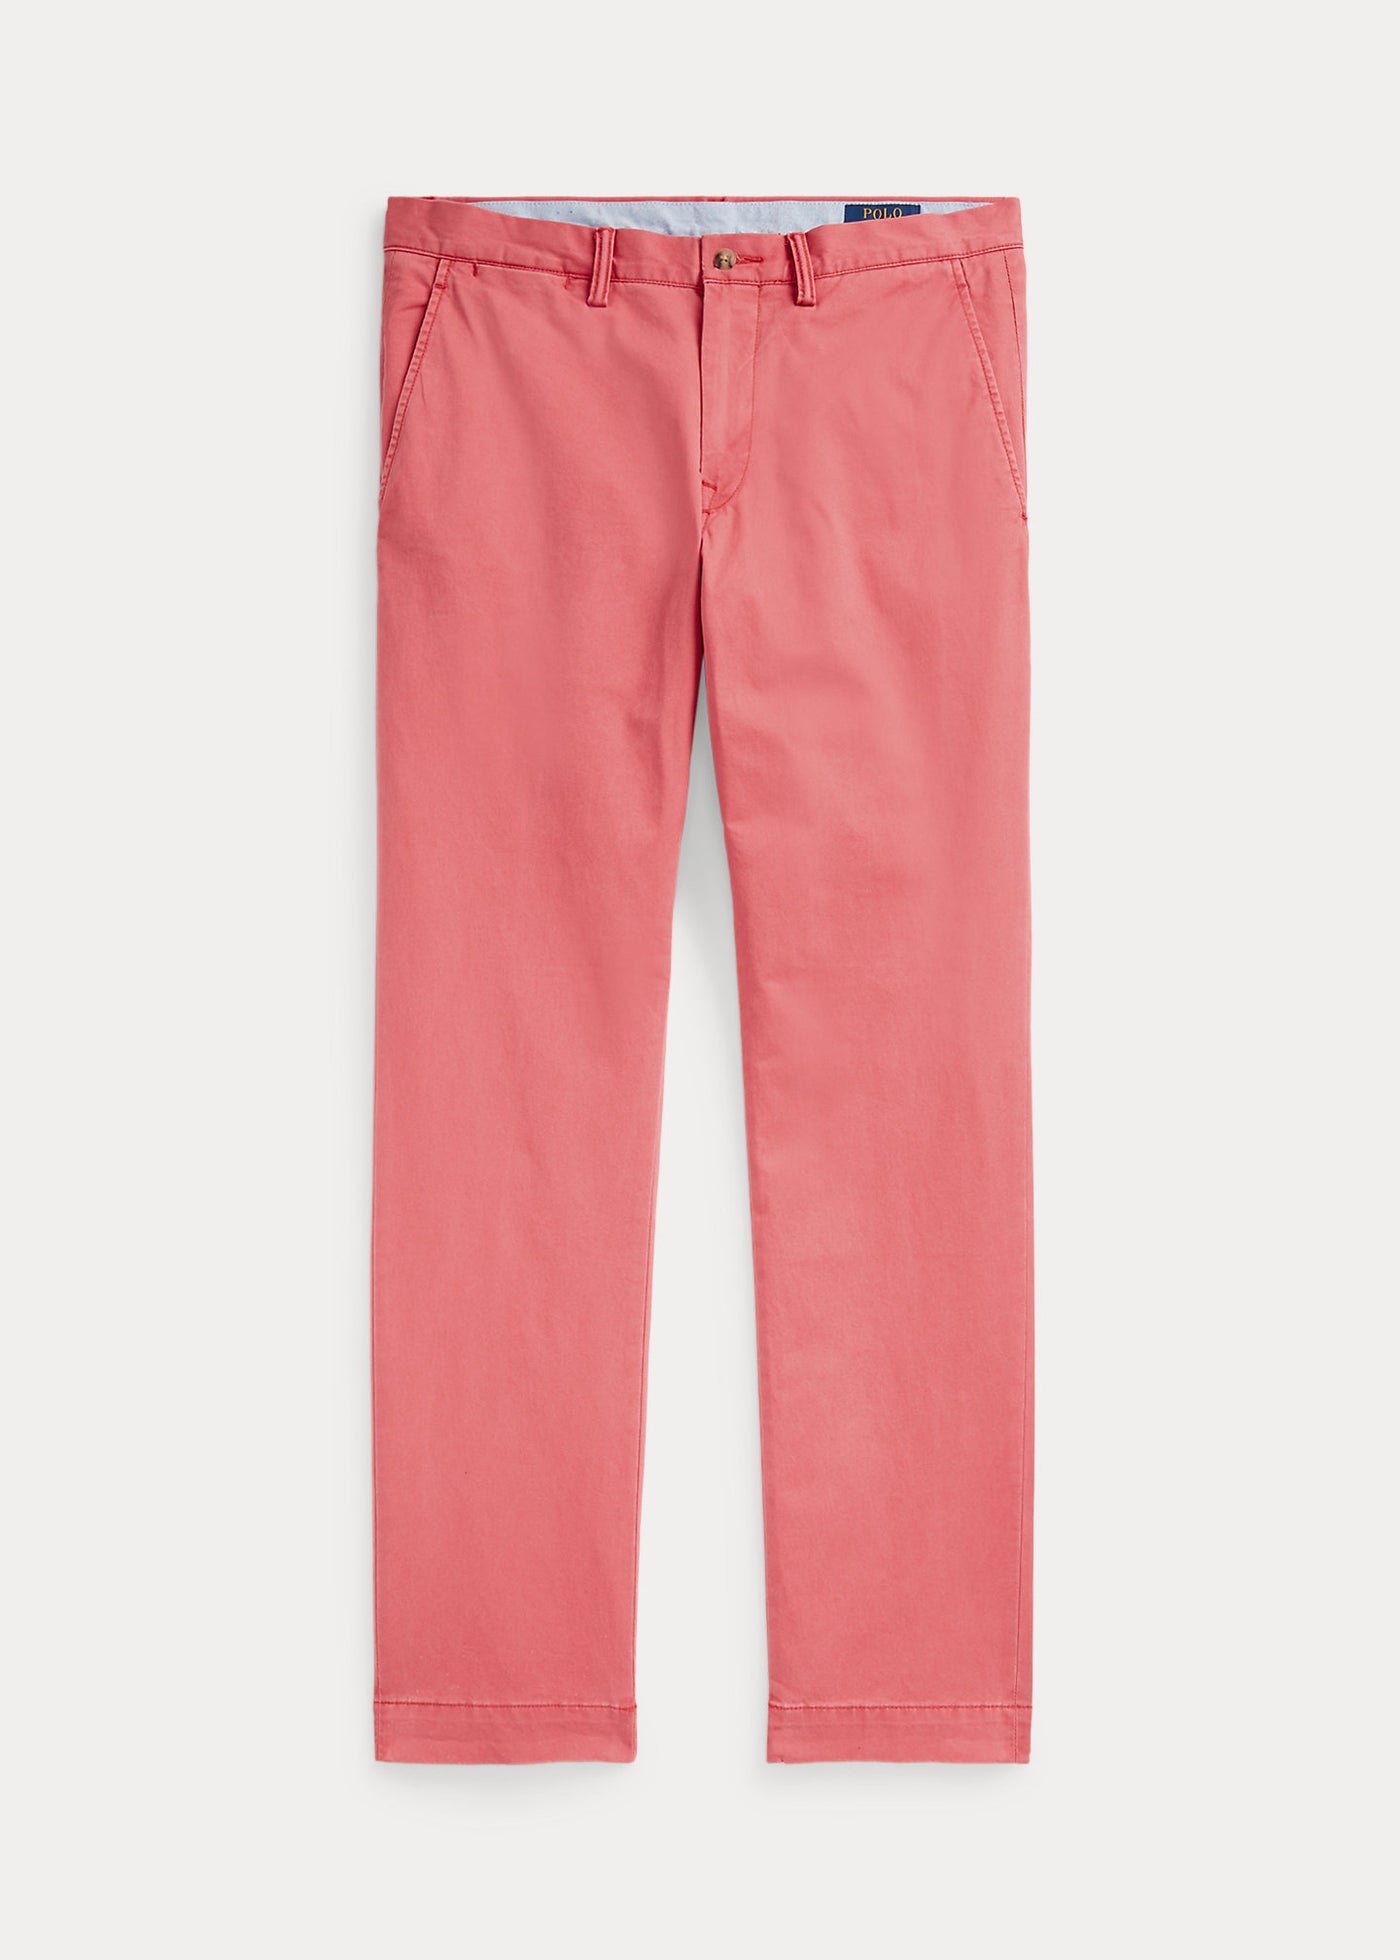 Ralph Lauren Washed Stretch Slim Fit Chino Trouser | Nantucket Red